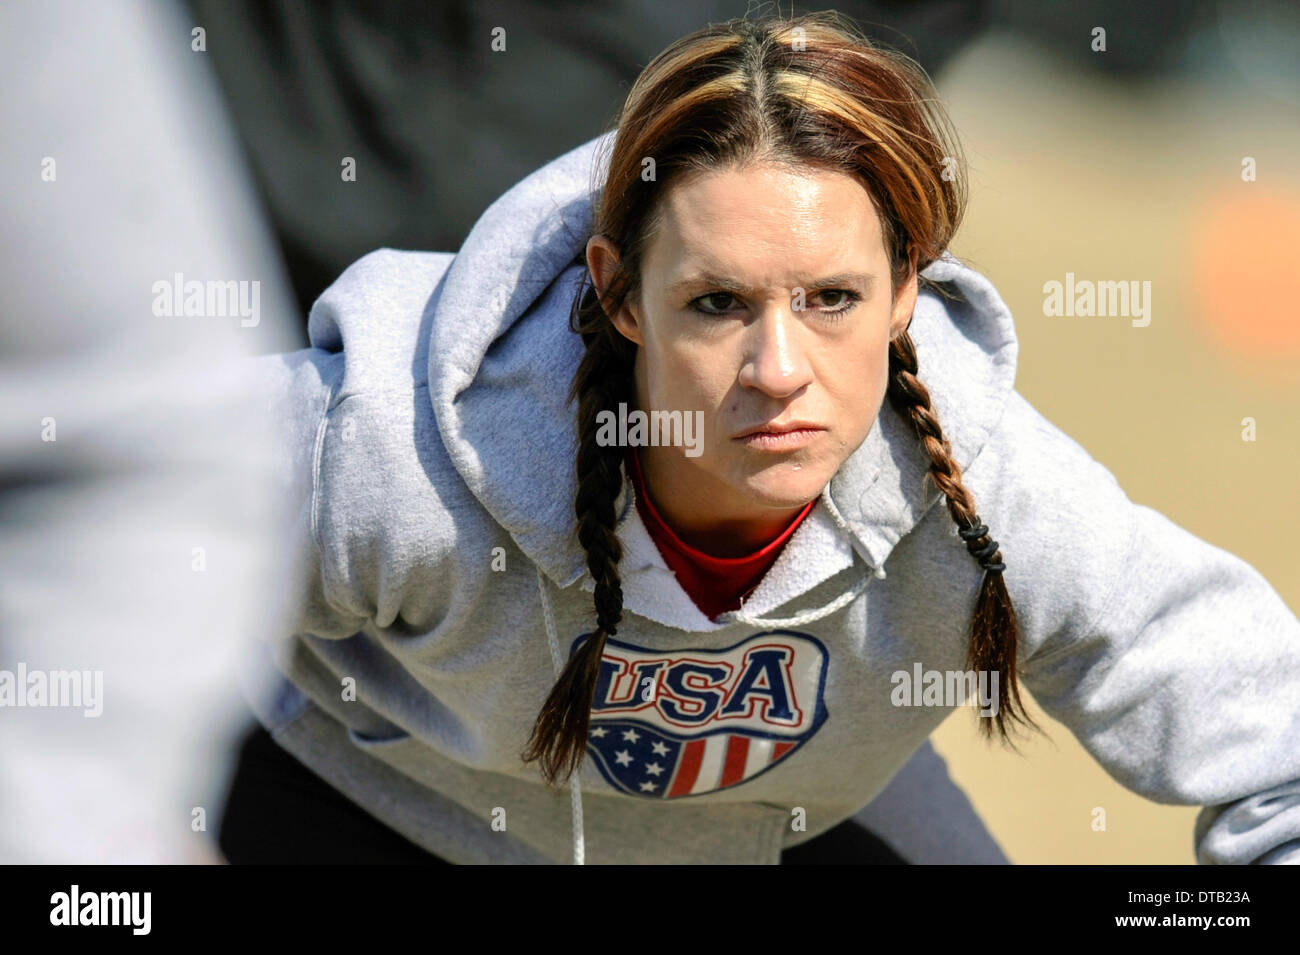 Feb. 13, 2014 - Allen, TX, United States of America - Jennifer Welter participates in a drill during practice Thursday, February 13, 2014, in Allen, Texas. The 5-foot-2-inch, 130 pound Welter is the first woman to try out for a professional football team at a position other than kicker, she is trying to make the Texas Revolution of the Arena Football League, as a running back. Stock Photo